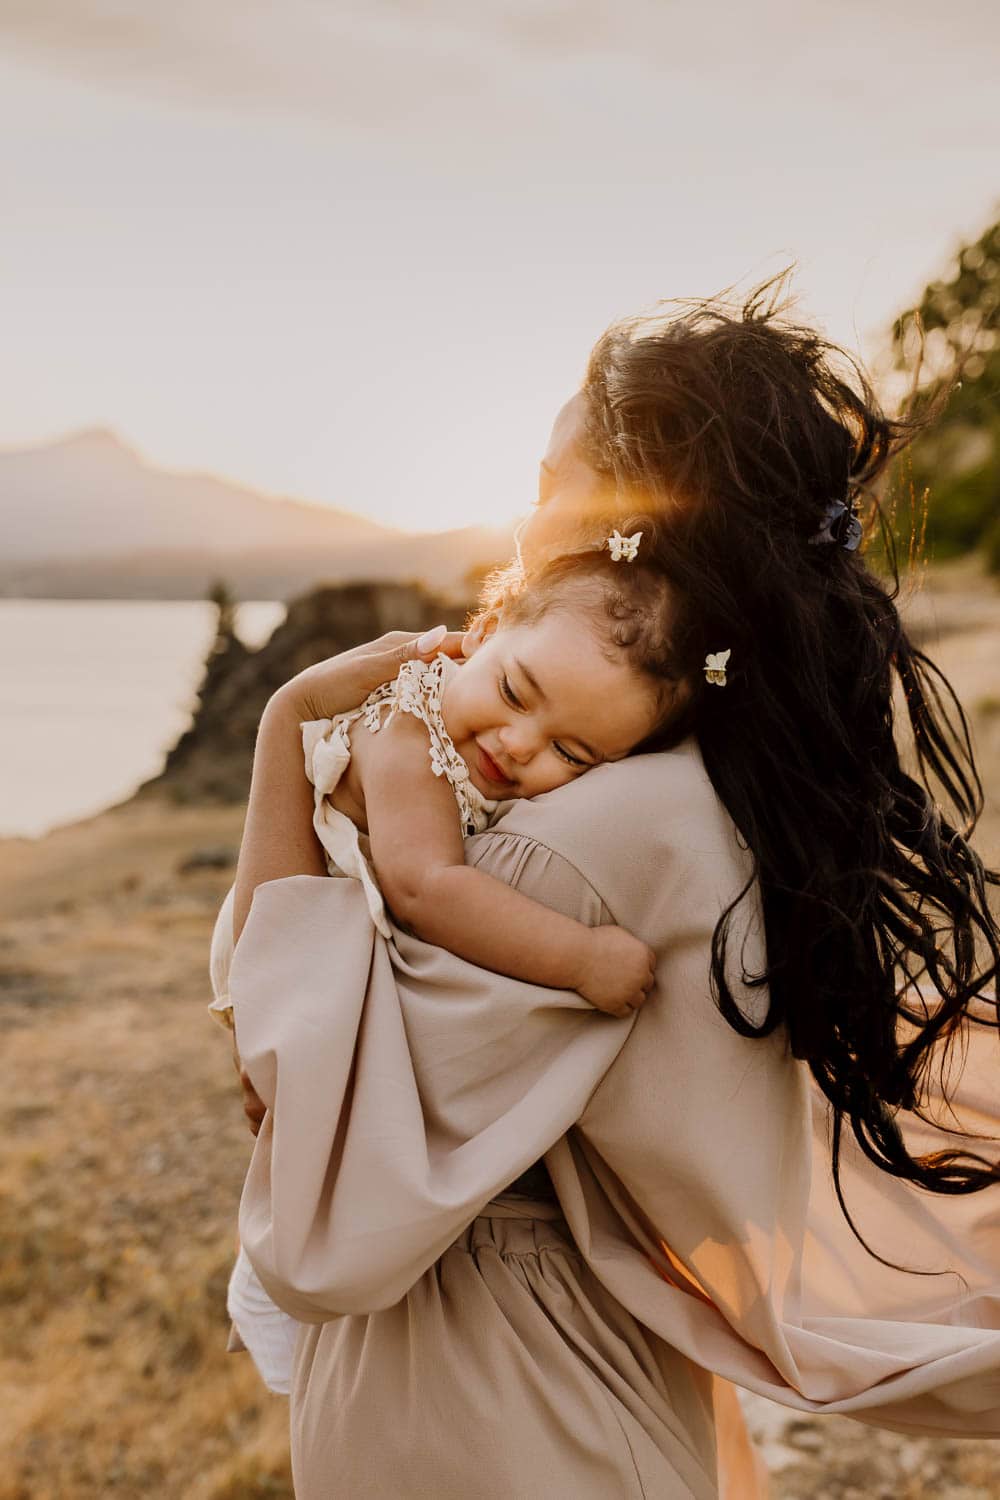 Mother embracing baby girl in the sunset light